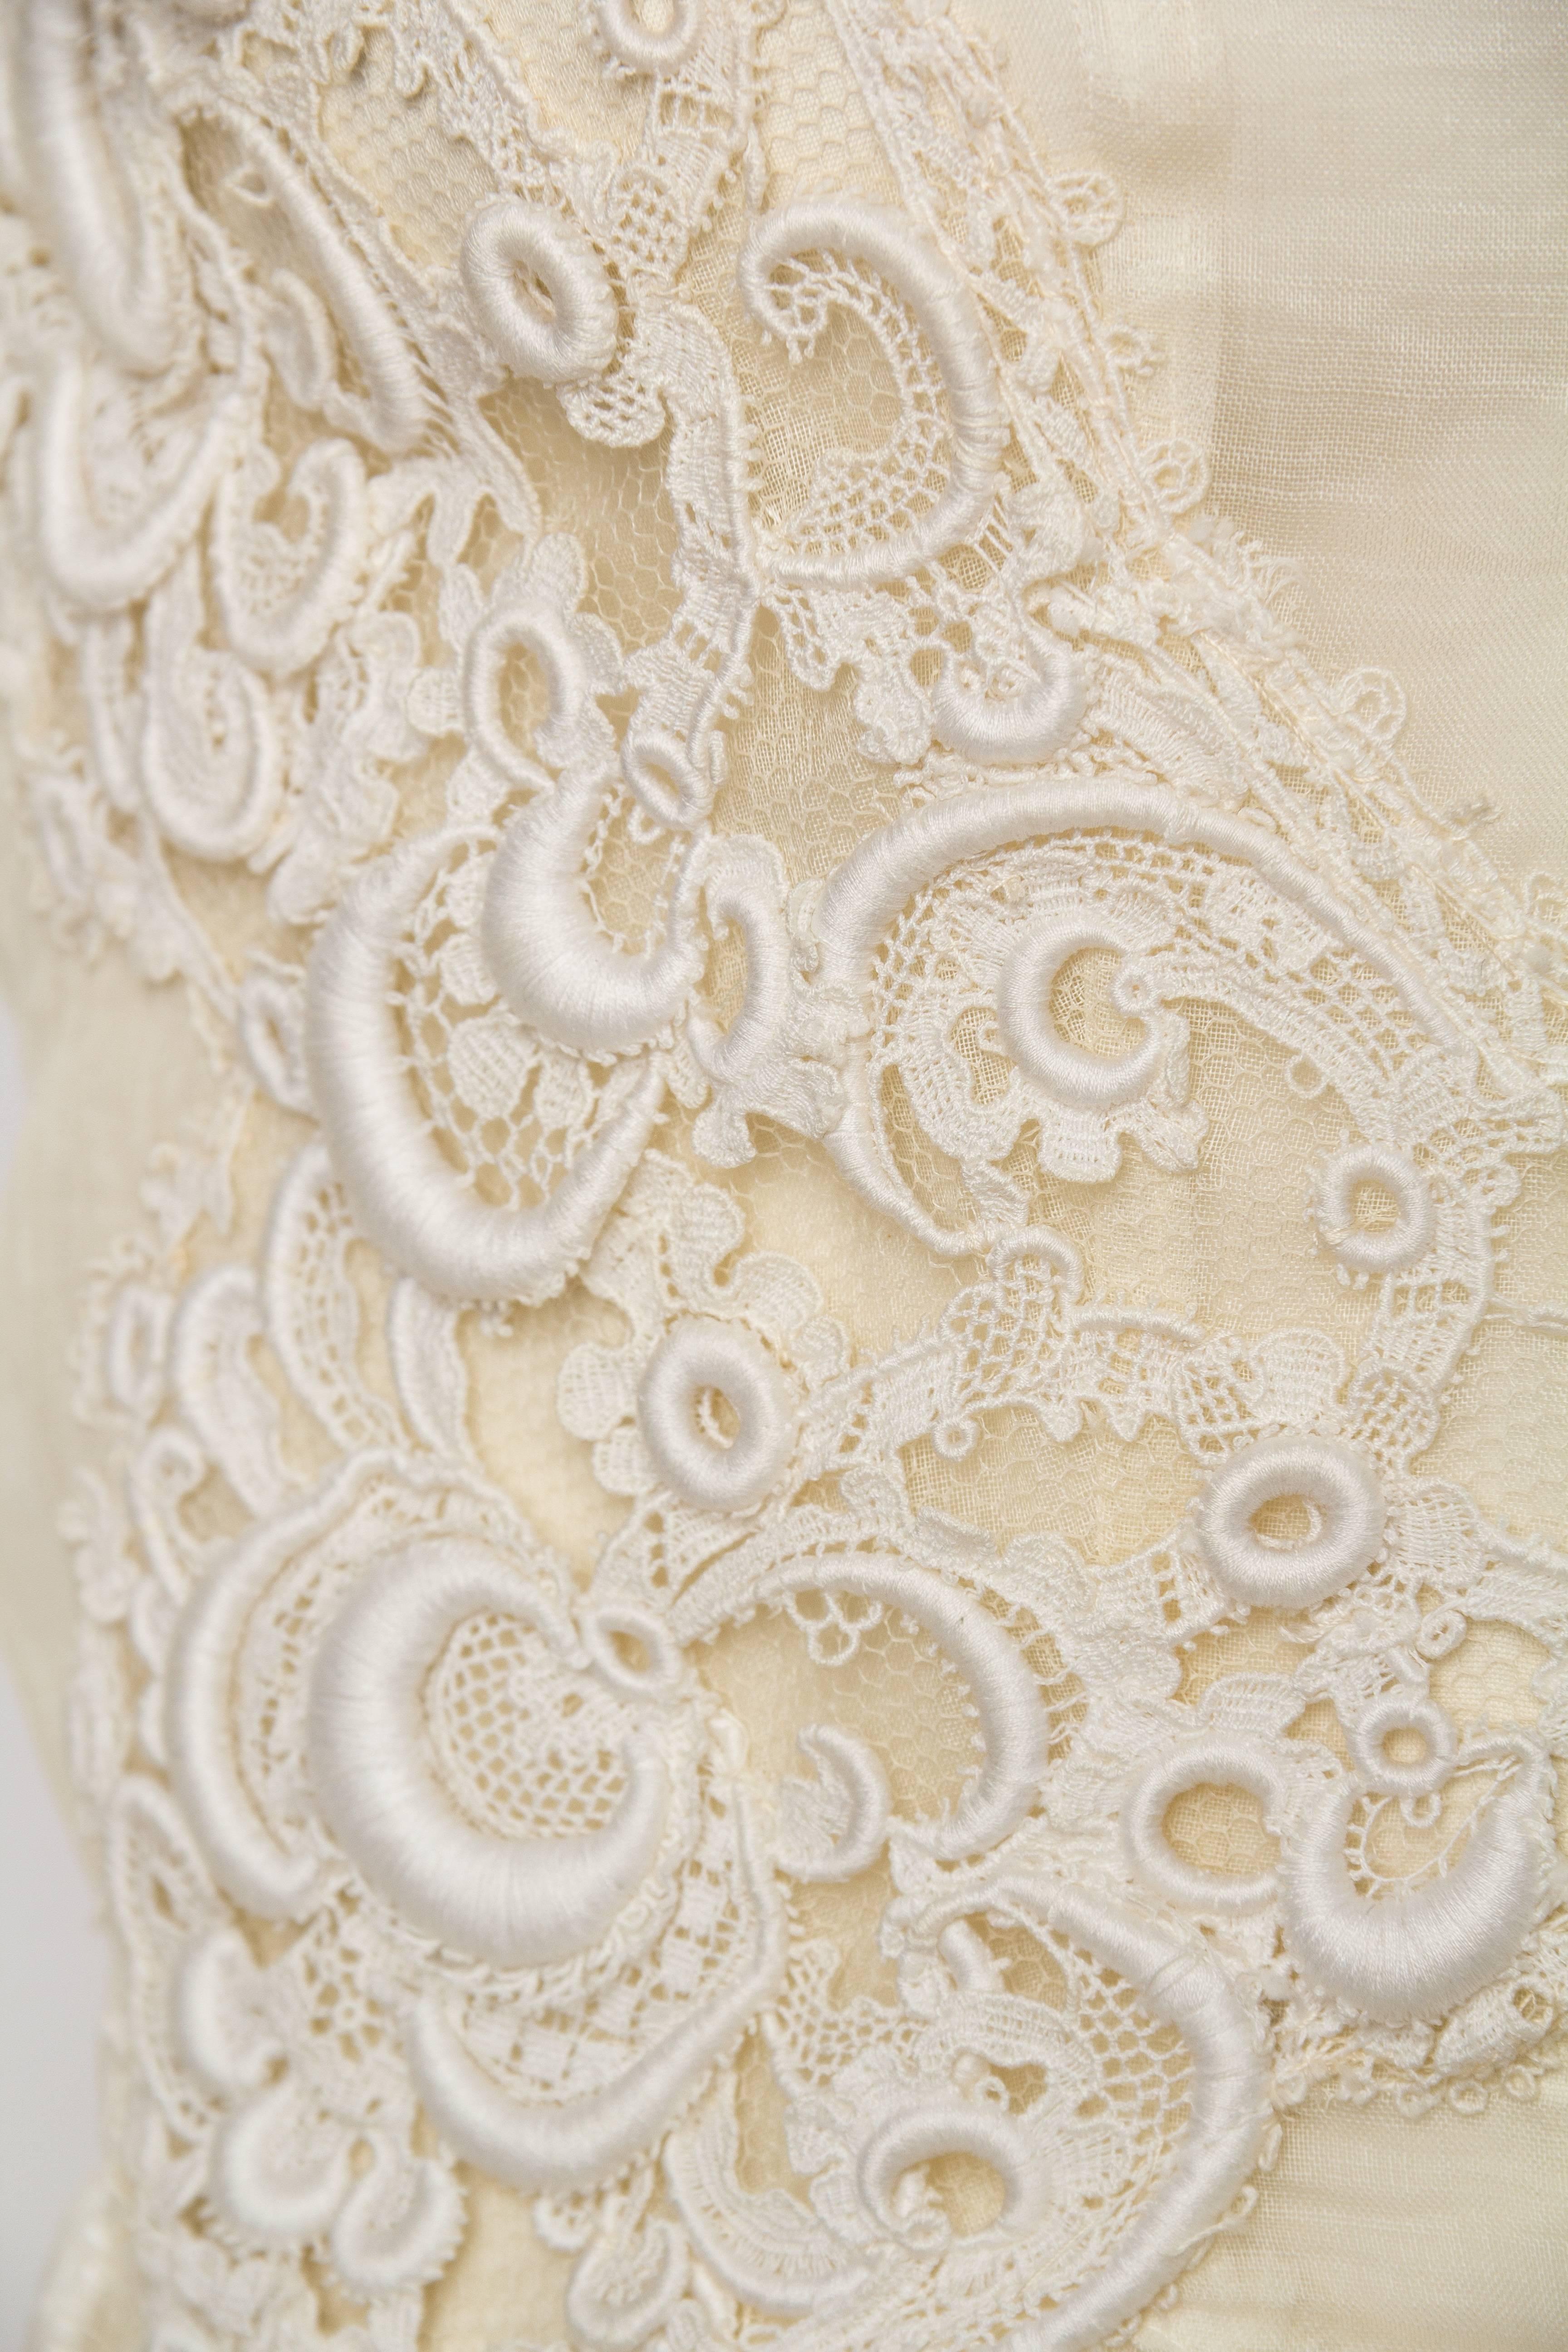 Alexander McQueen Inspired re-worked 1930s Lace Dress 5